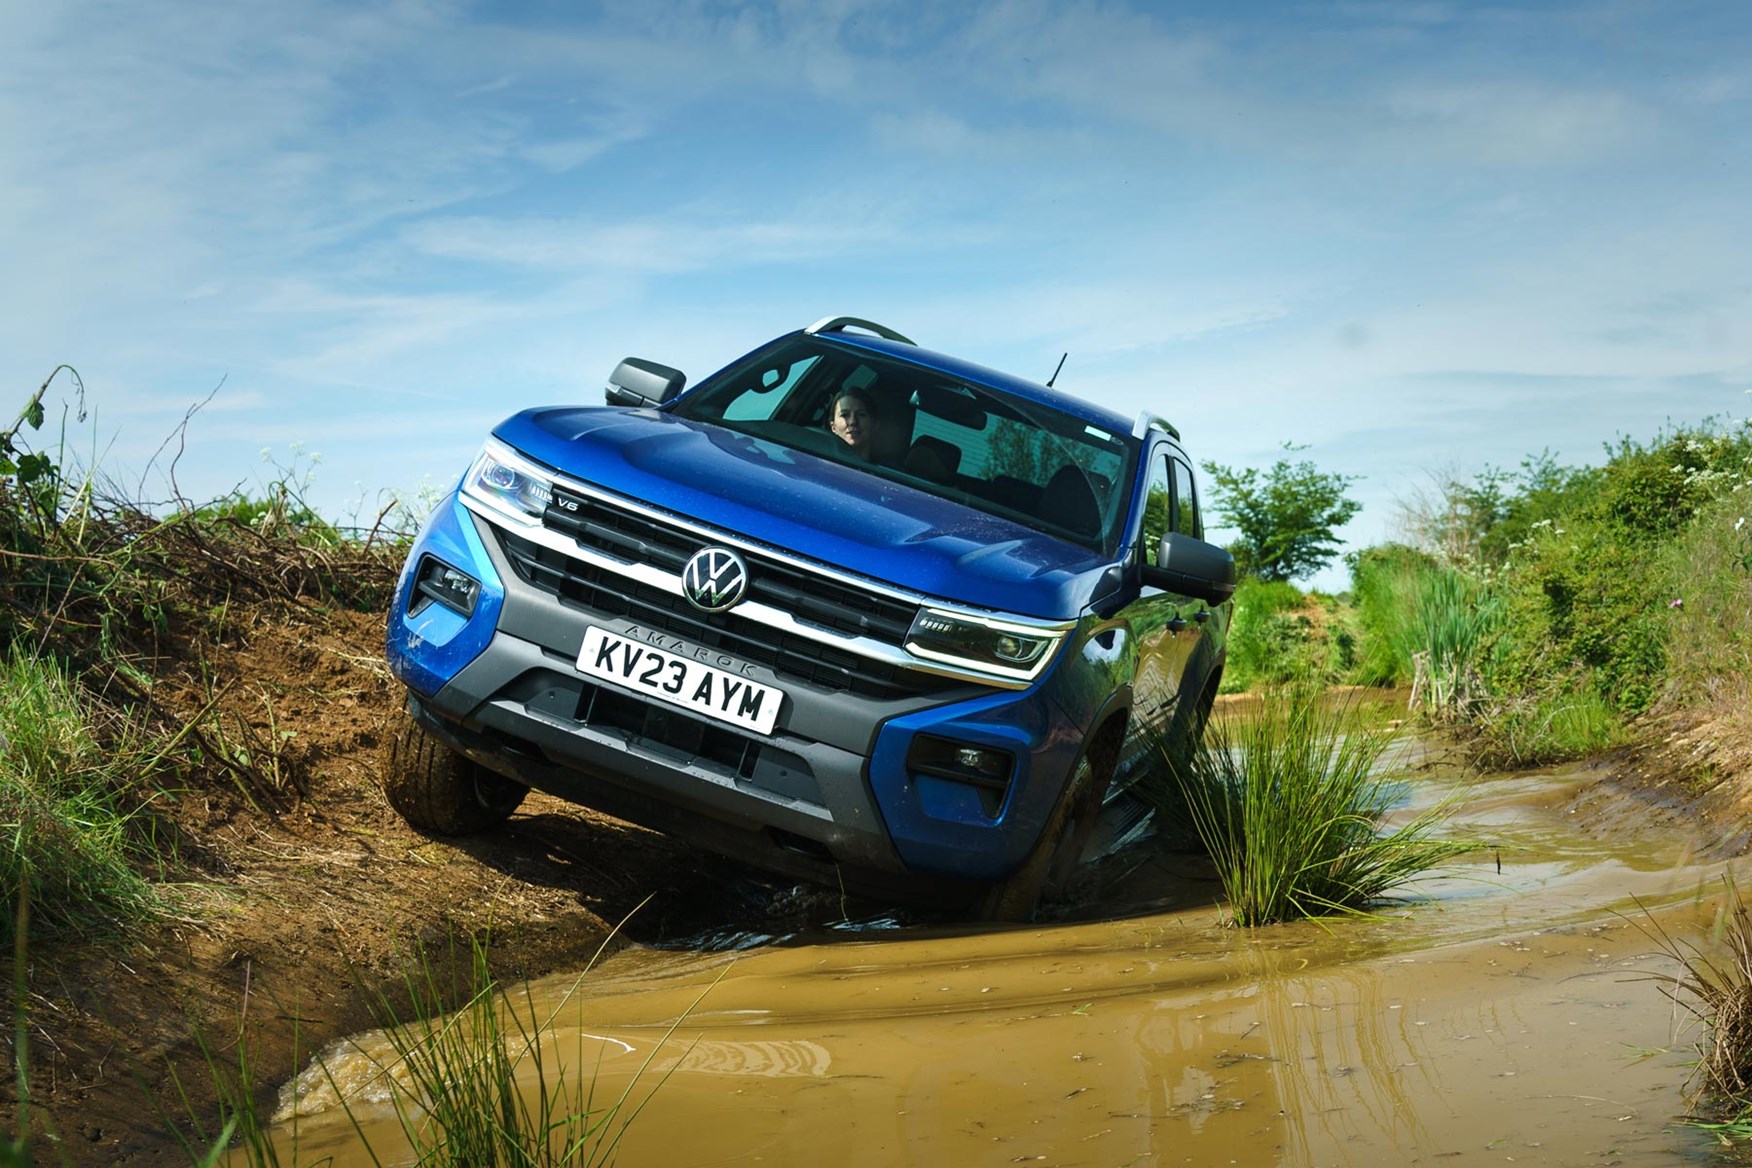 Volkswagen Amarok is adept off road, with many settings to choose from.